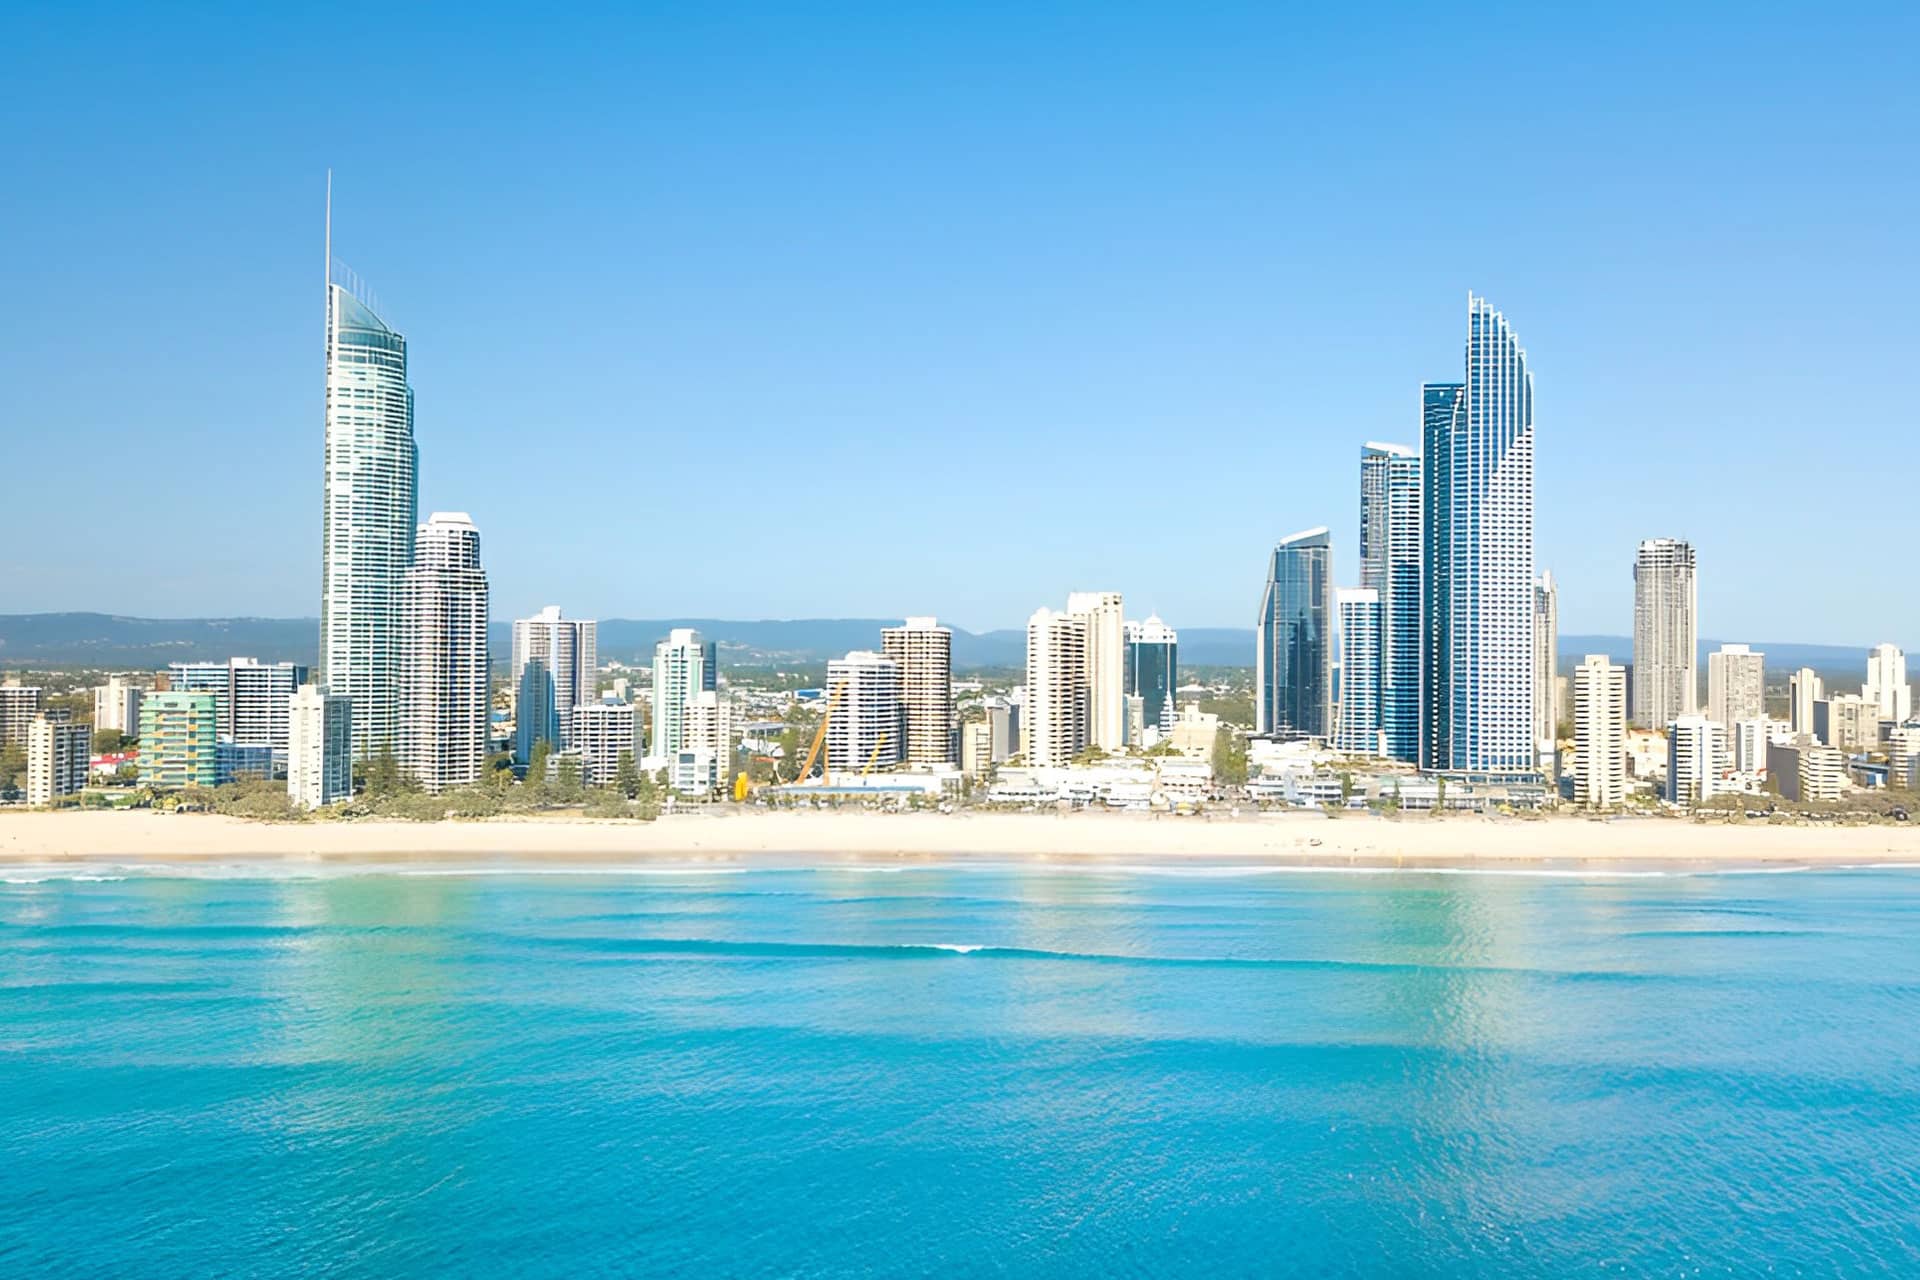 An Aerial View Of Surfers Paradise On The Gold Coast — Locksmiths in Surfers Paradise, QLD